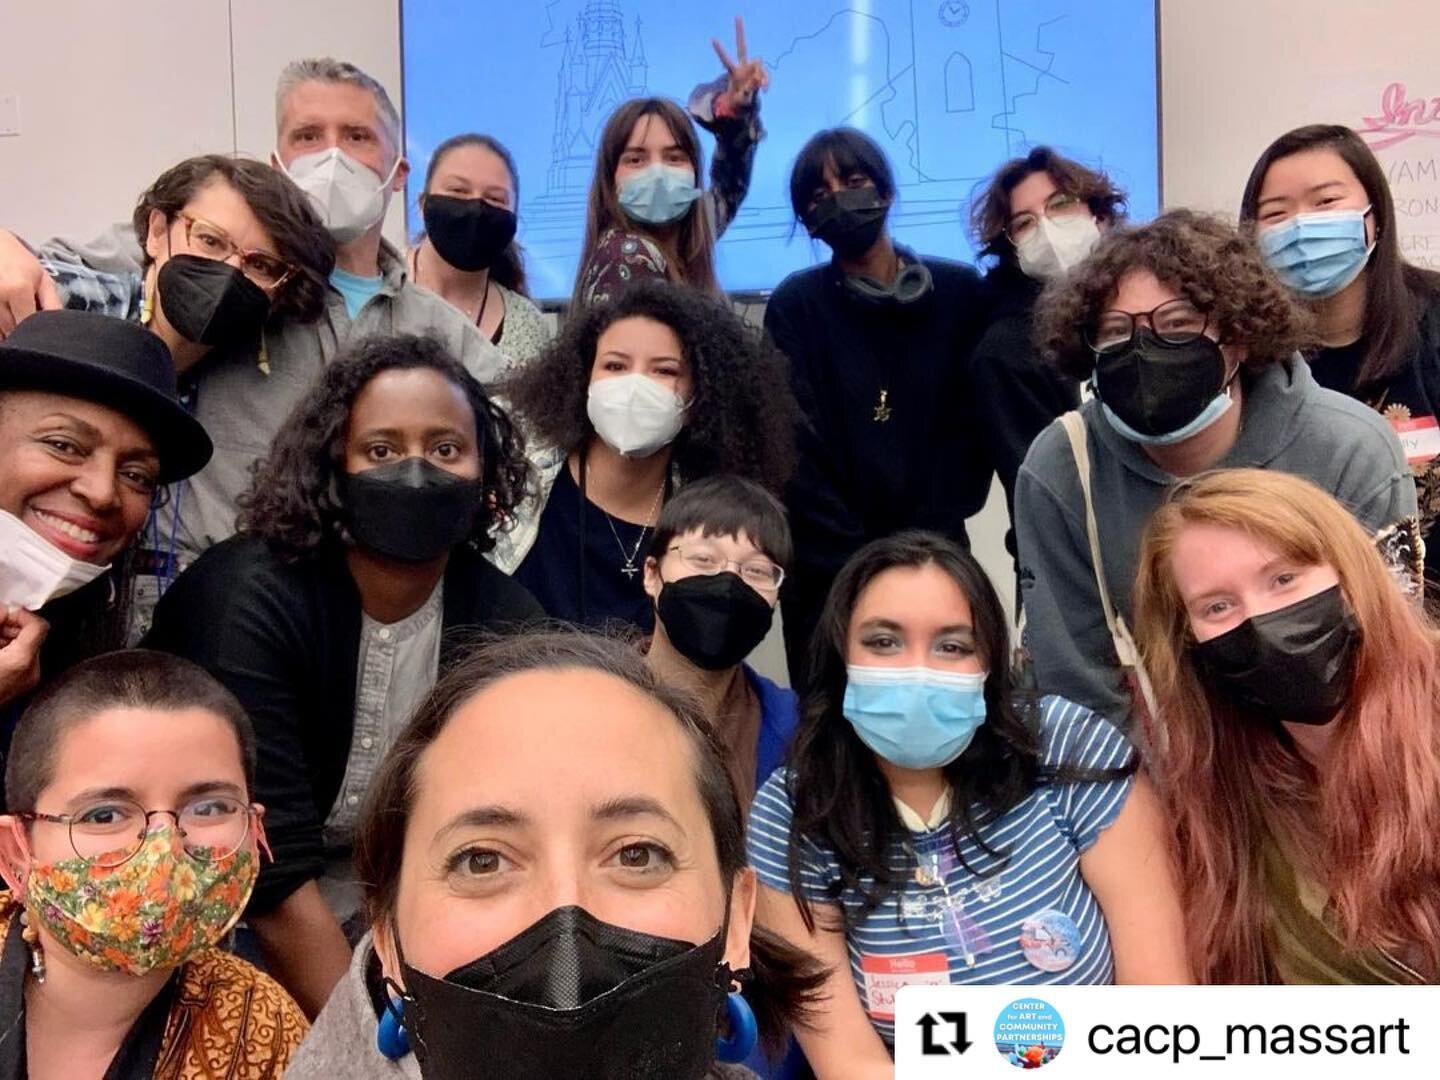 Great evening talking to MassArt students who are supporting Boston organization and thinking about how to shape our public spaces. 

#energizing 

#Repost @cacp_massart with @make_repost
・・・
We gathered with our CACP student cohort last night - our 